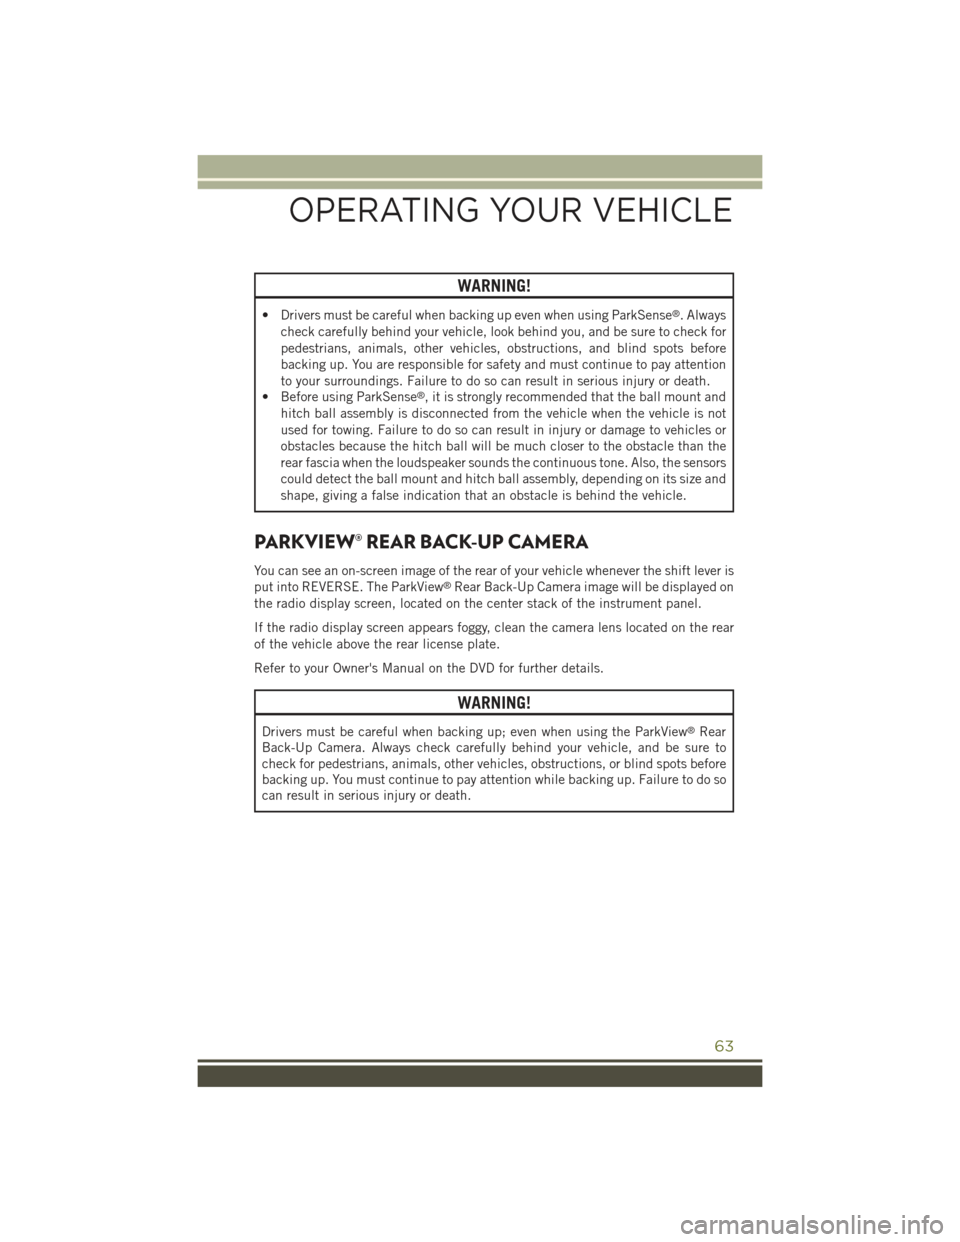 JEEP CHEROKEE 2015 KL / 5.G Owners Manual WARNING!
• Drivers must be careful when backing up even when using ParkSense®. Always
check carefully behind your vehicle, look behind you, and be sure to check for
pedestrians, animals, other vehi